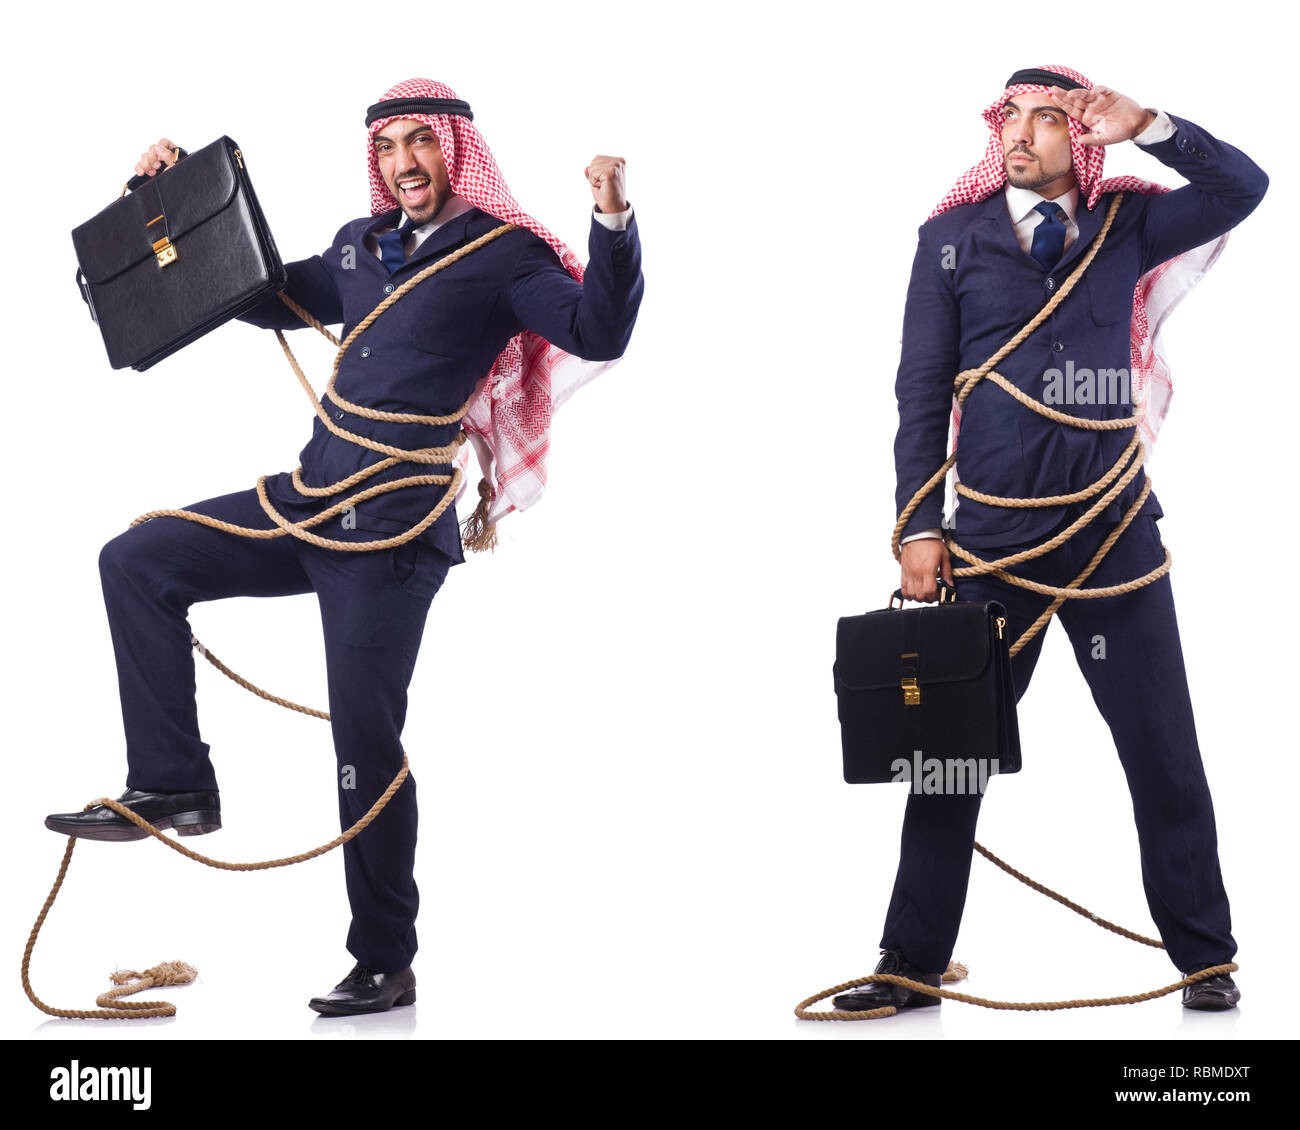 Arab man tied up with rope Stock Photo